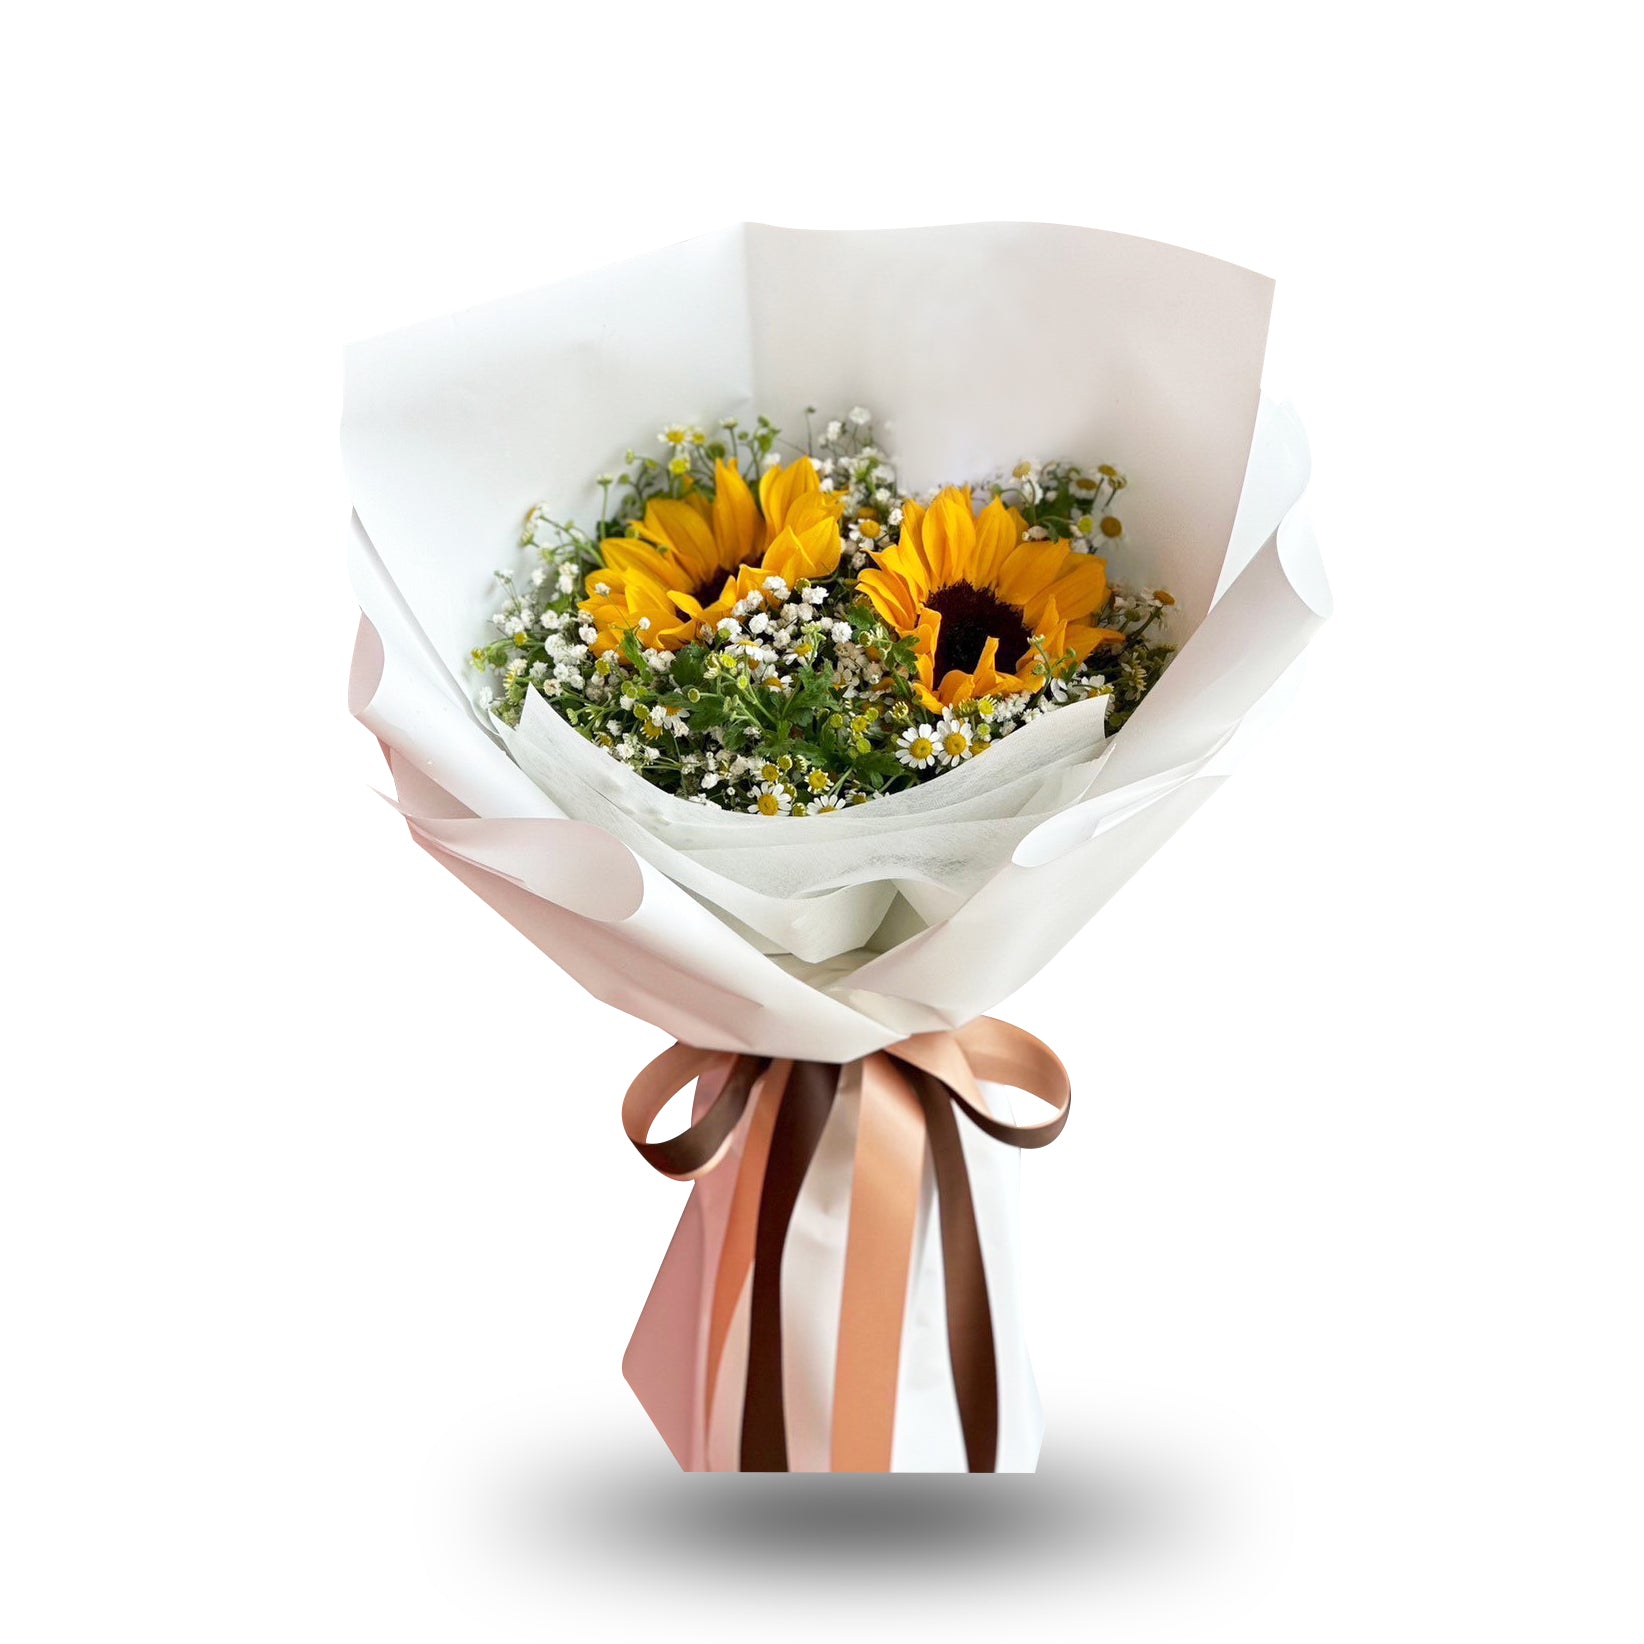 Sweet Bouquet Of Sunflowers mixed with Daisy - Phuket